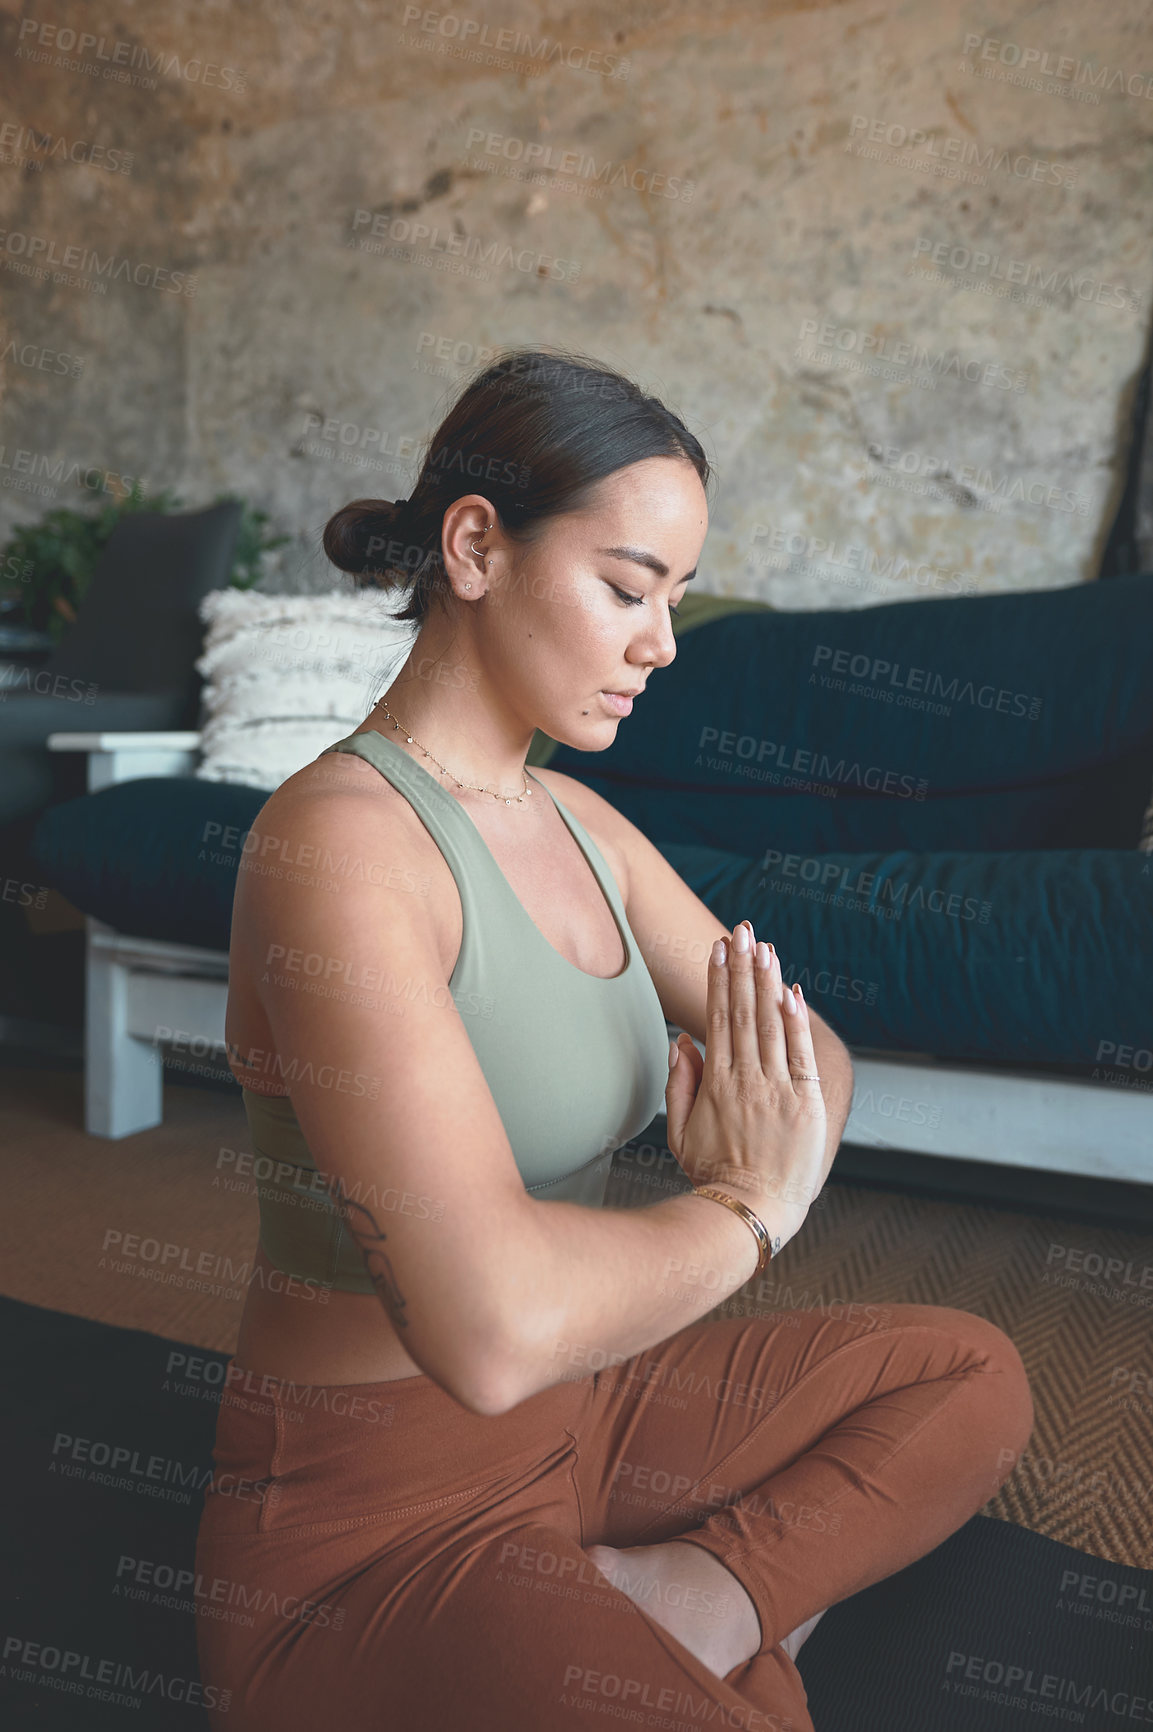 Buy stock photo Shot of a young woman meditating while practising yoga at home